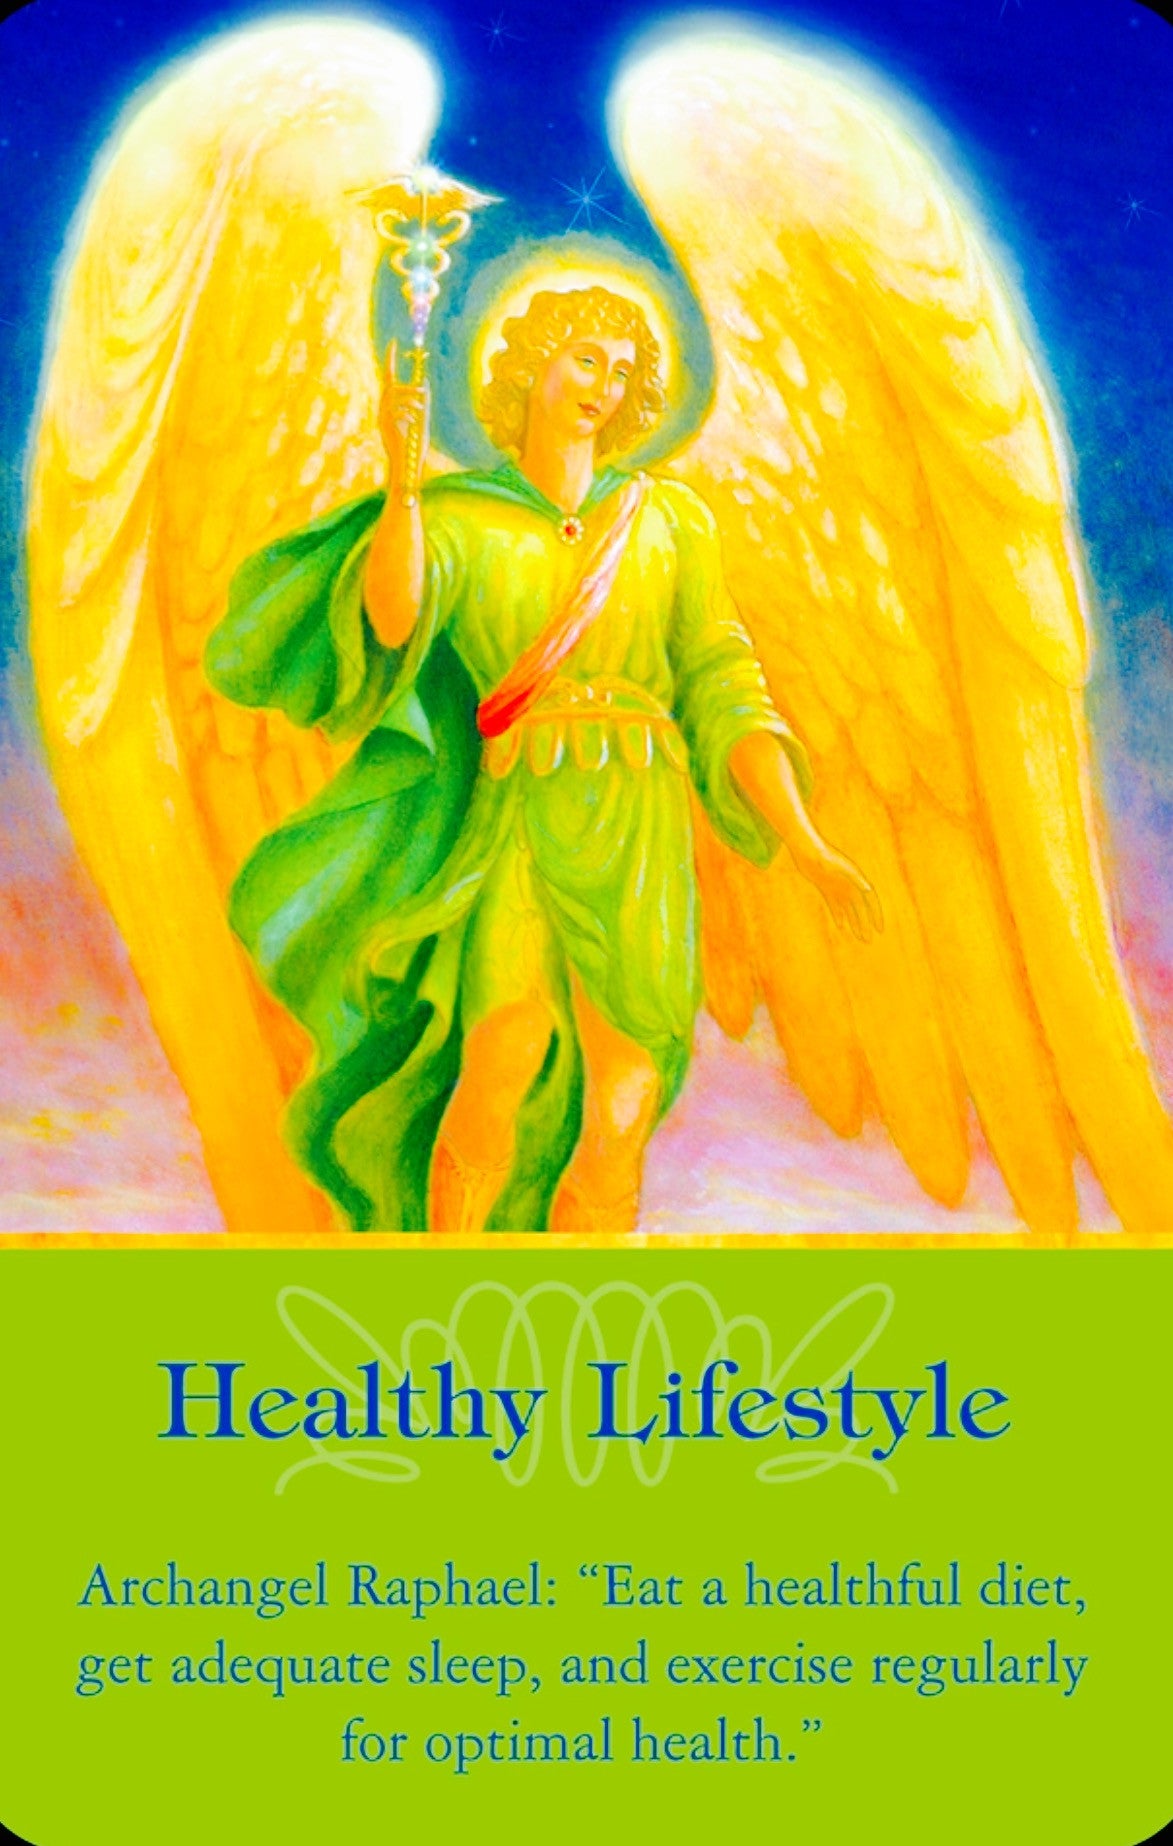 Archangel Raphael: “Eat a healthful diet, get adequate sleep, and exercise regularly for optimal health.”